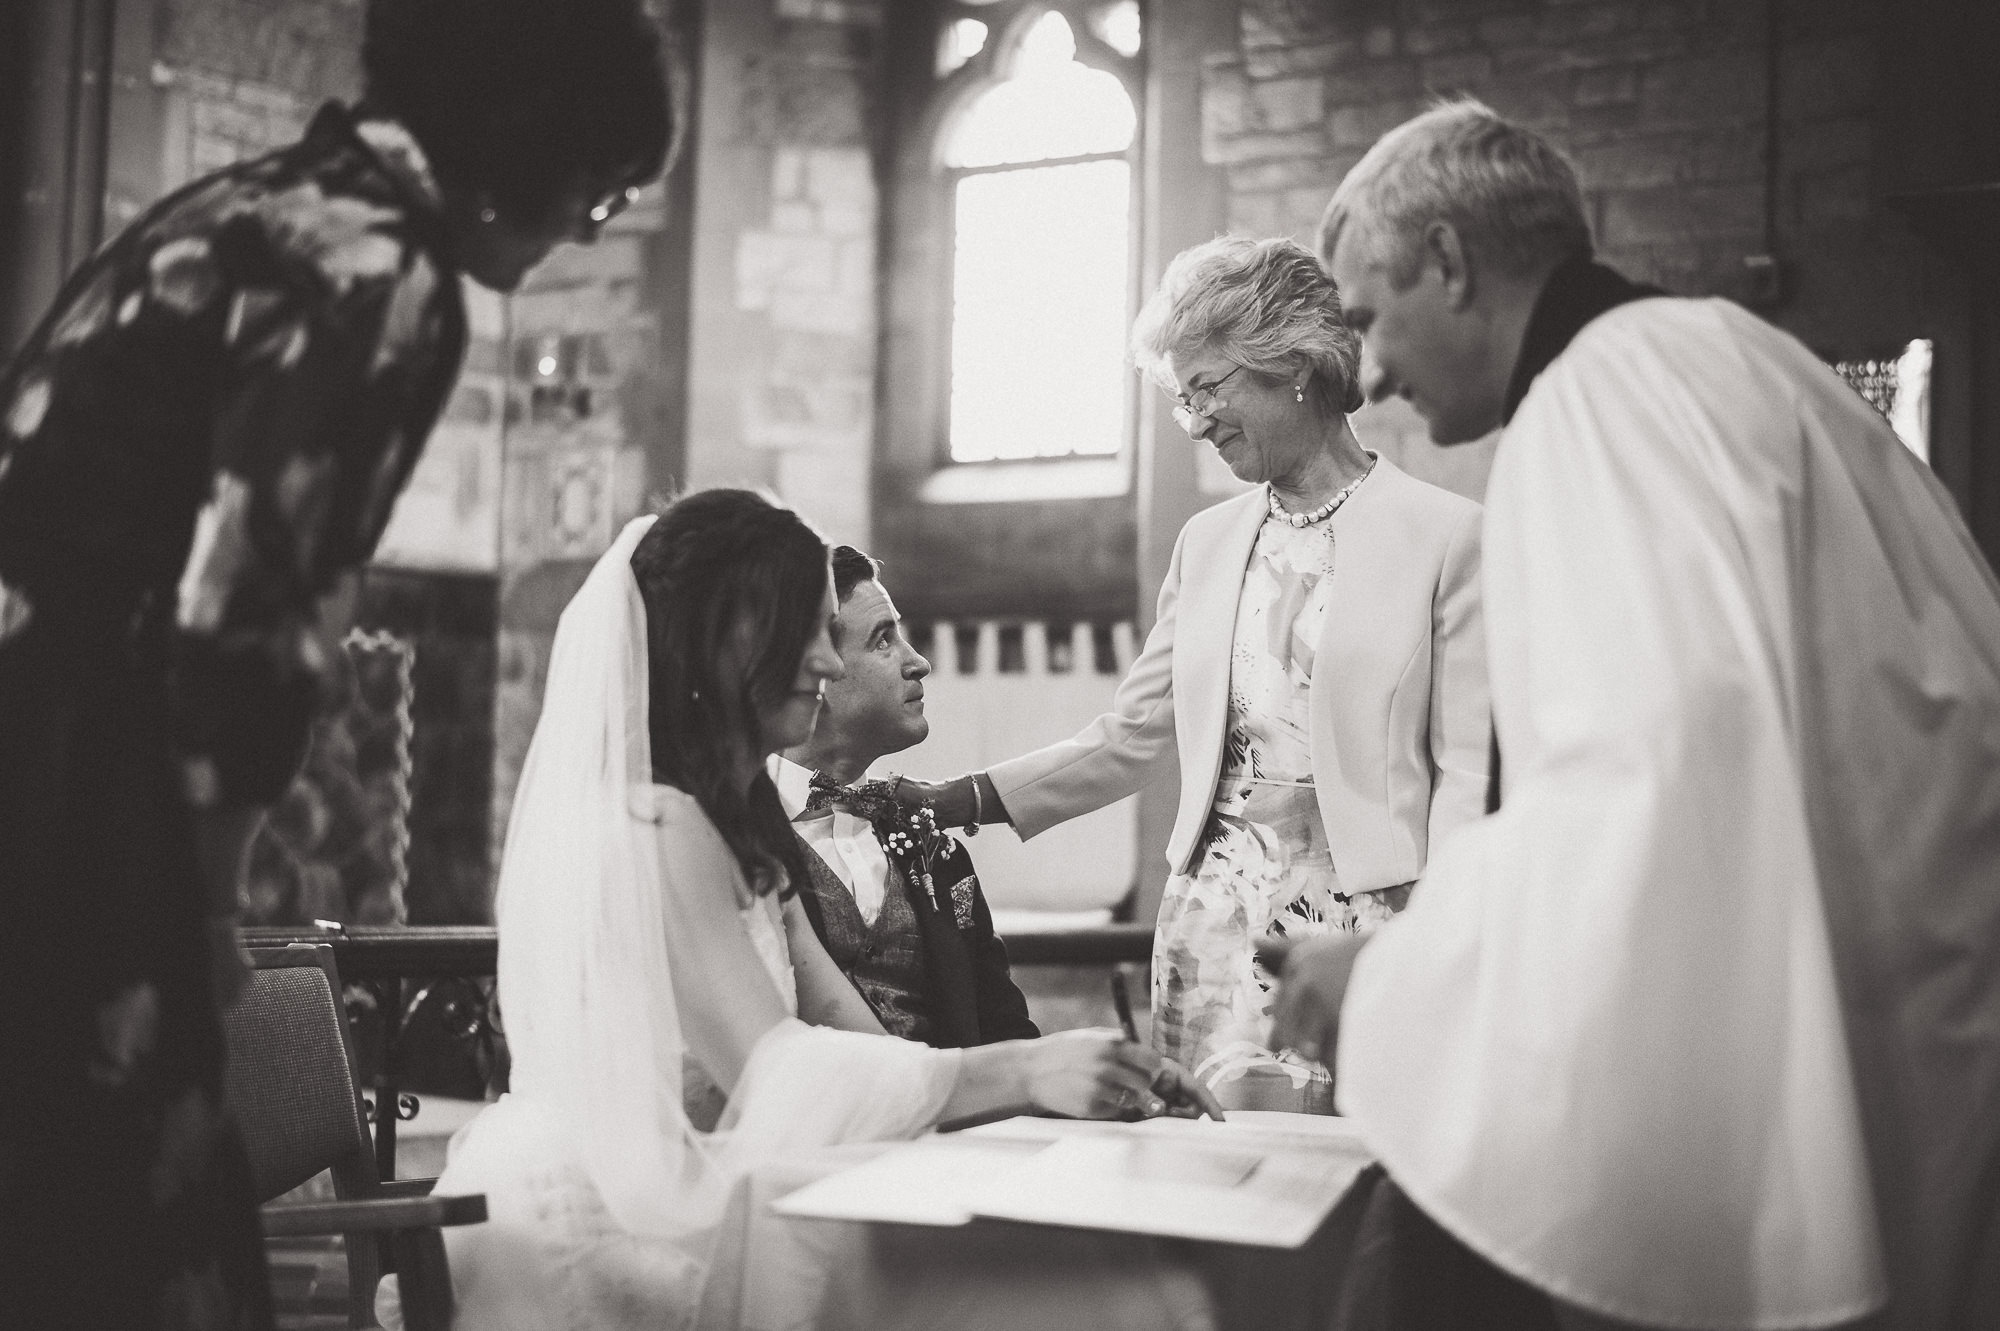 A wedding photographer captures a groom signing his wedding vows in a church.